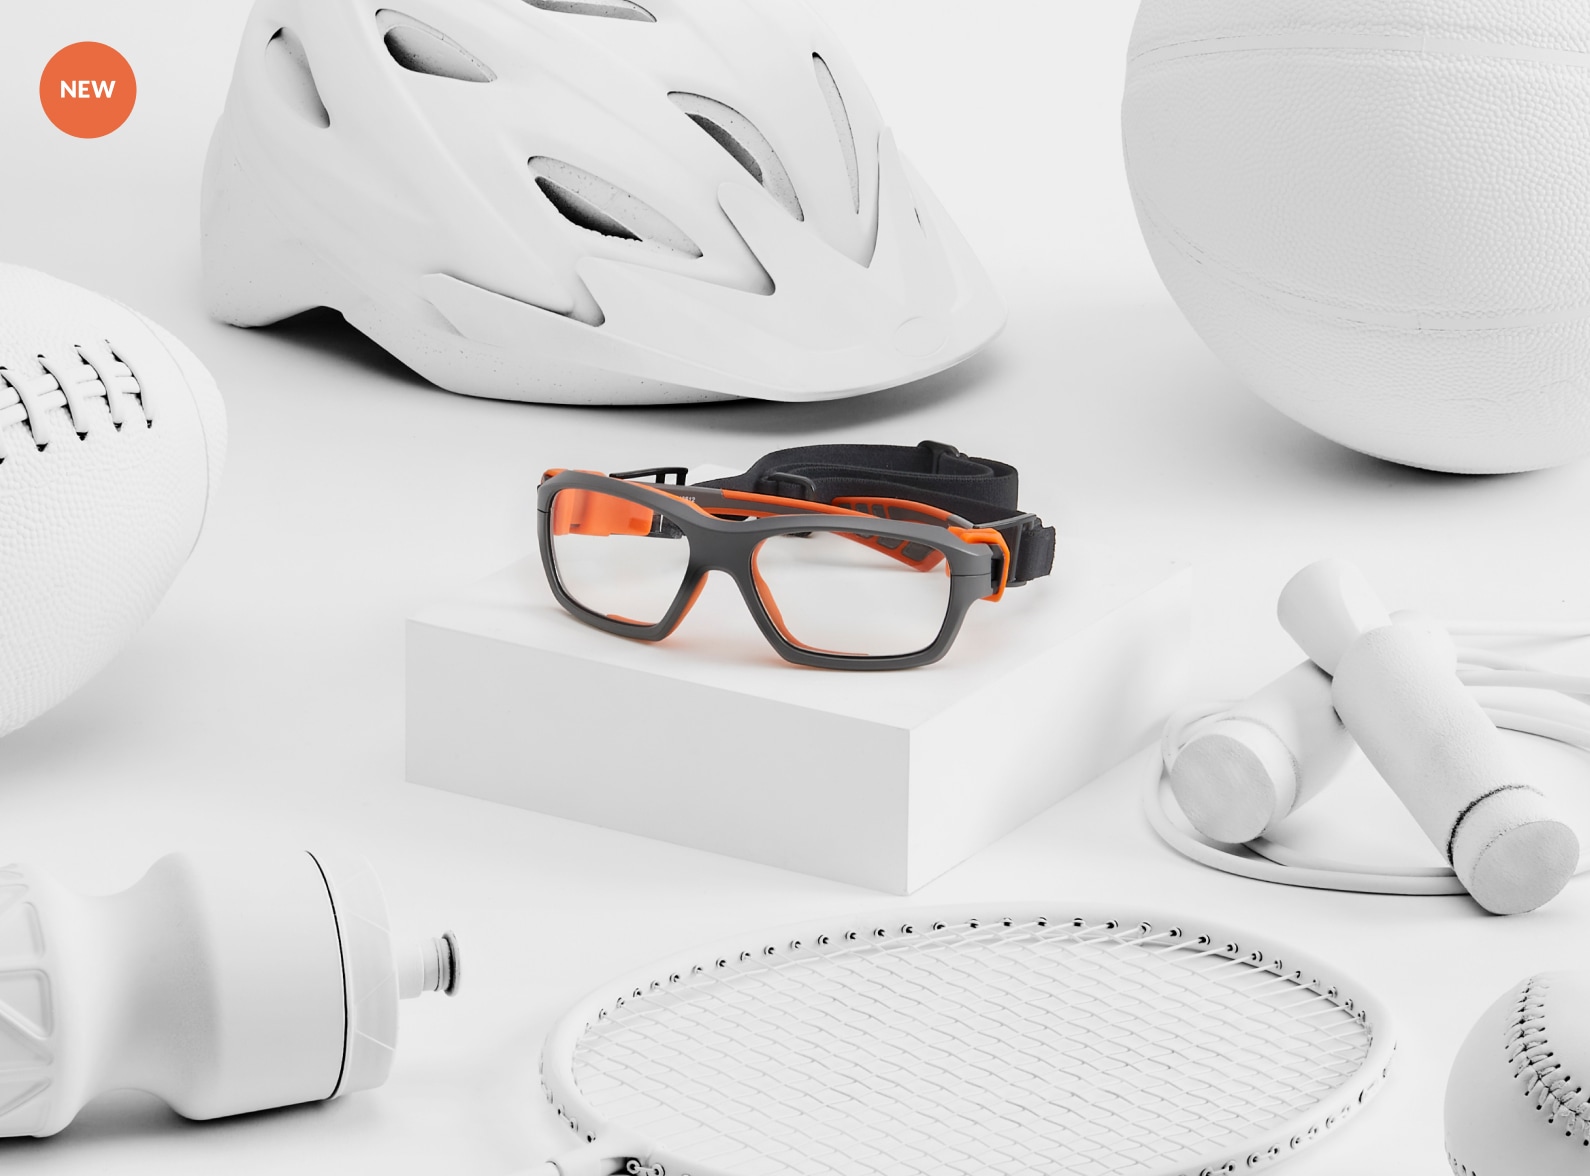 Gray and orange protective sports glasses surrounded by white sports equipment including a helmet and racket.